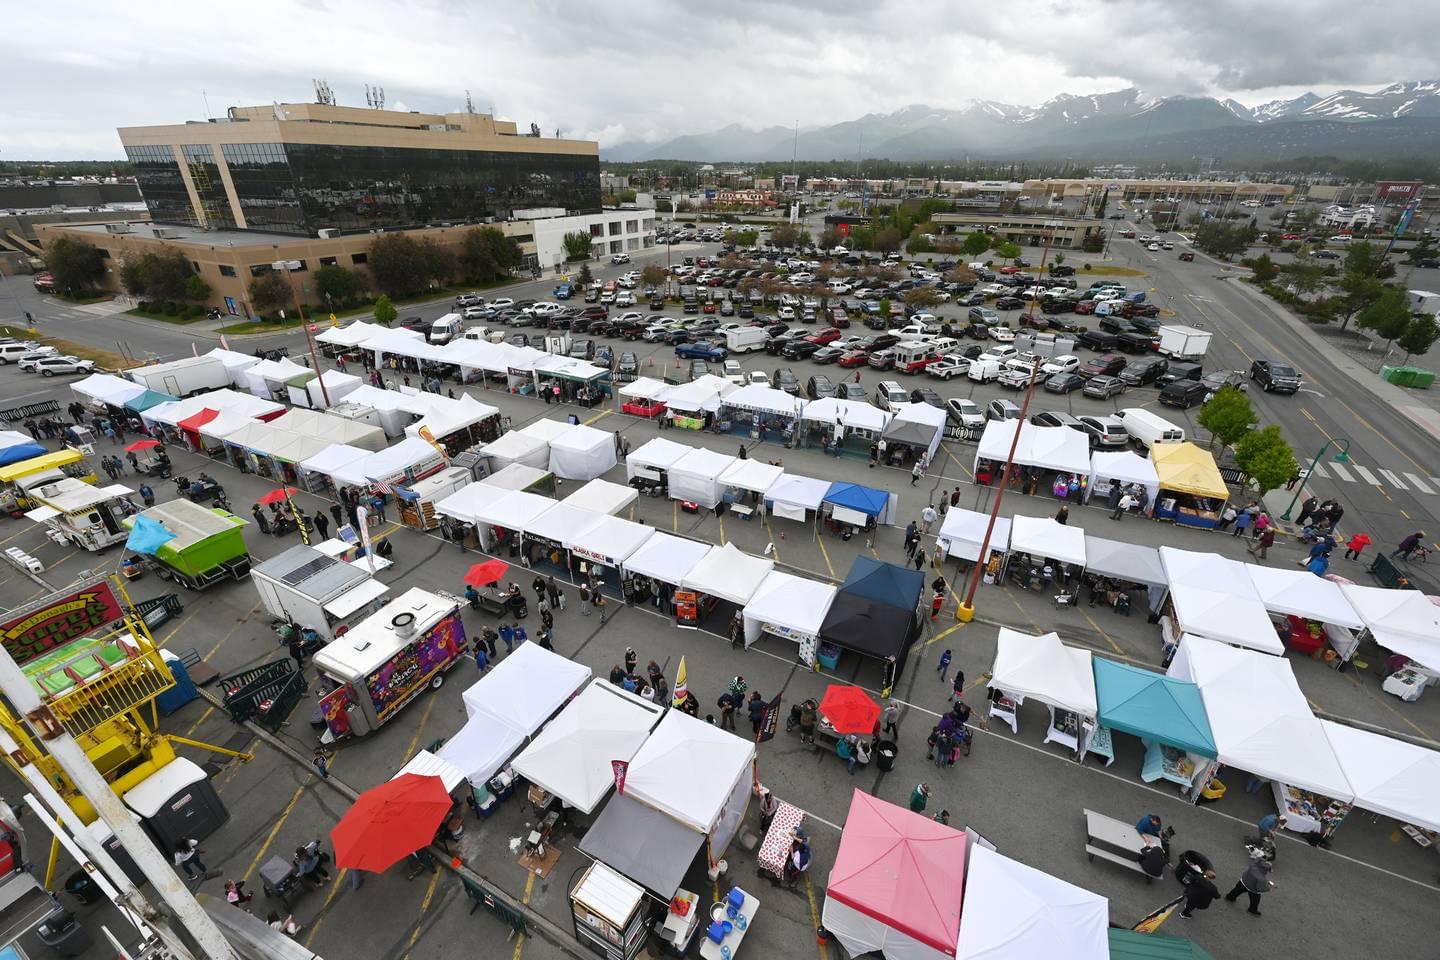 Anchorage Farmer’s Market Overview